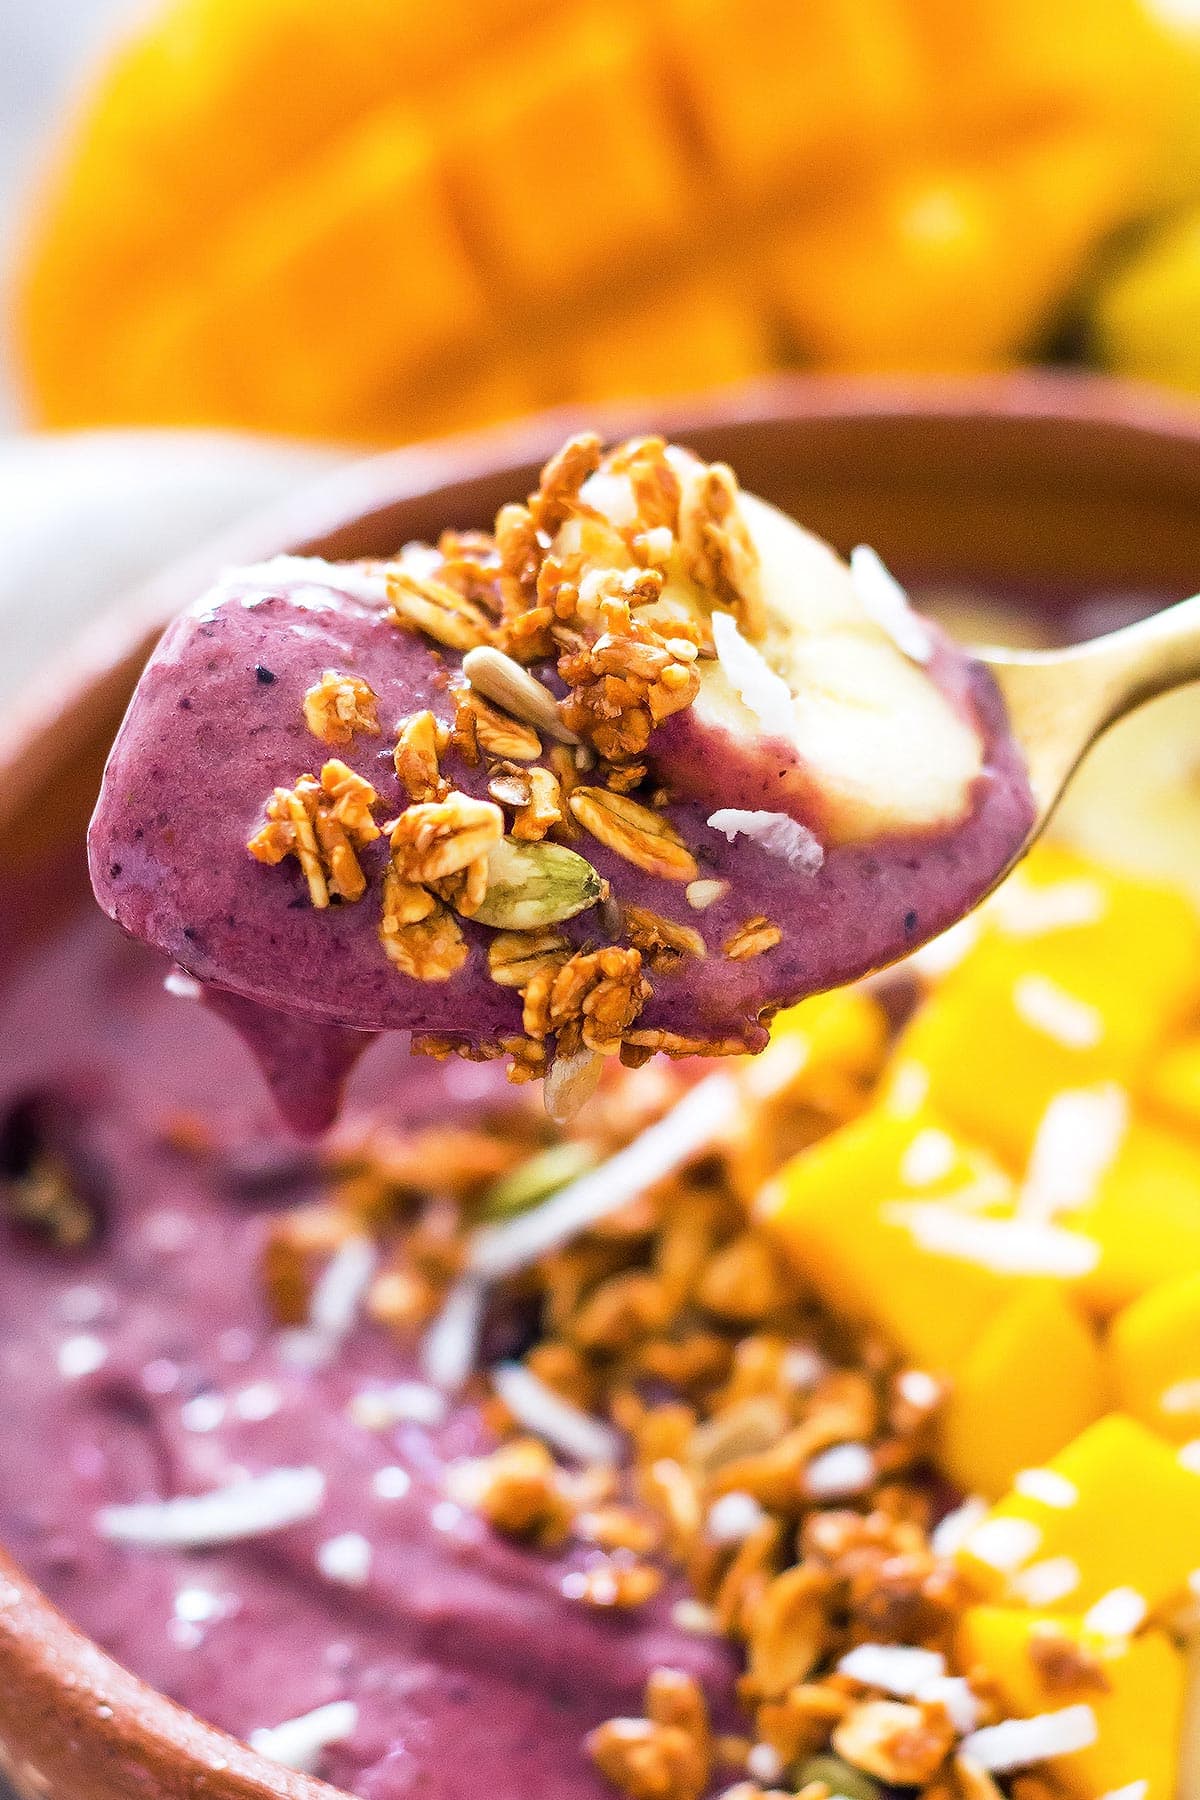 Spoonful of Frozen acai smoothie